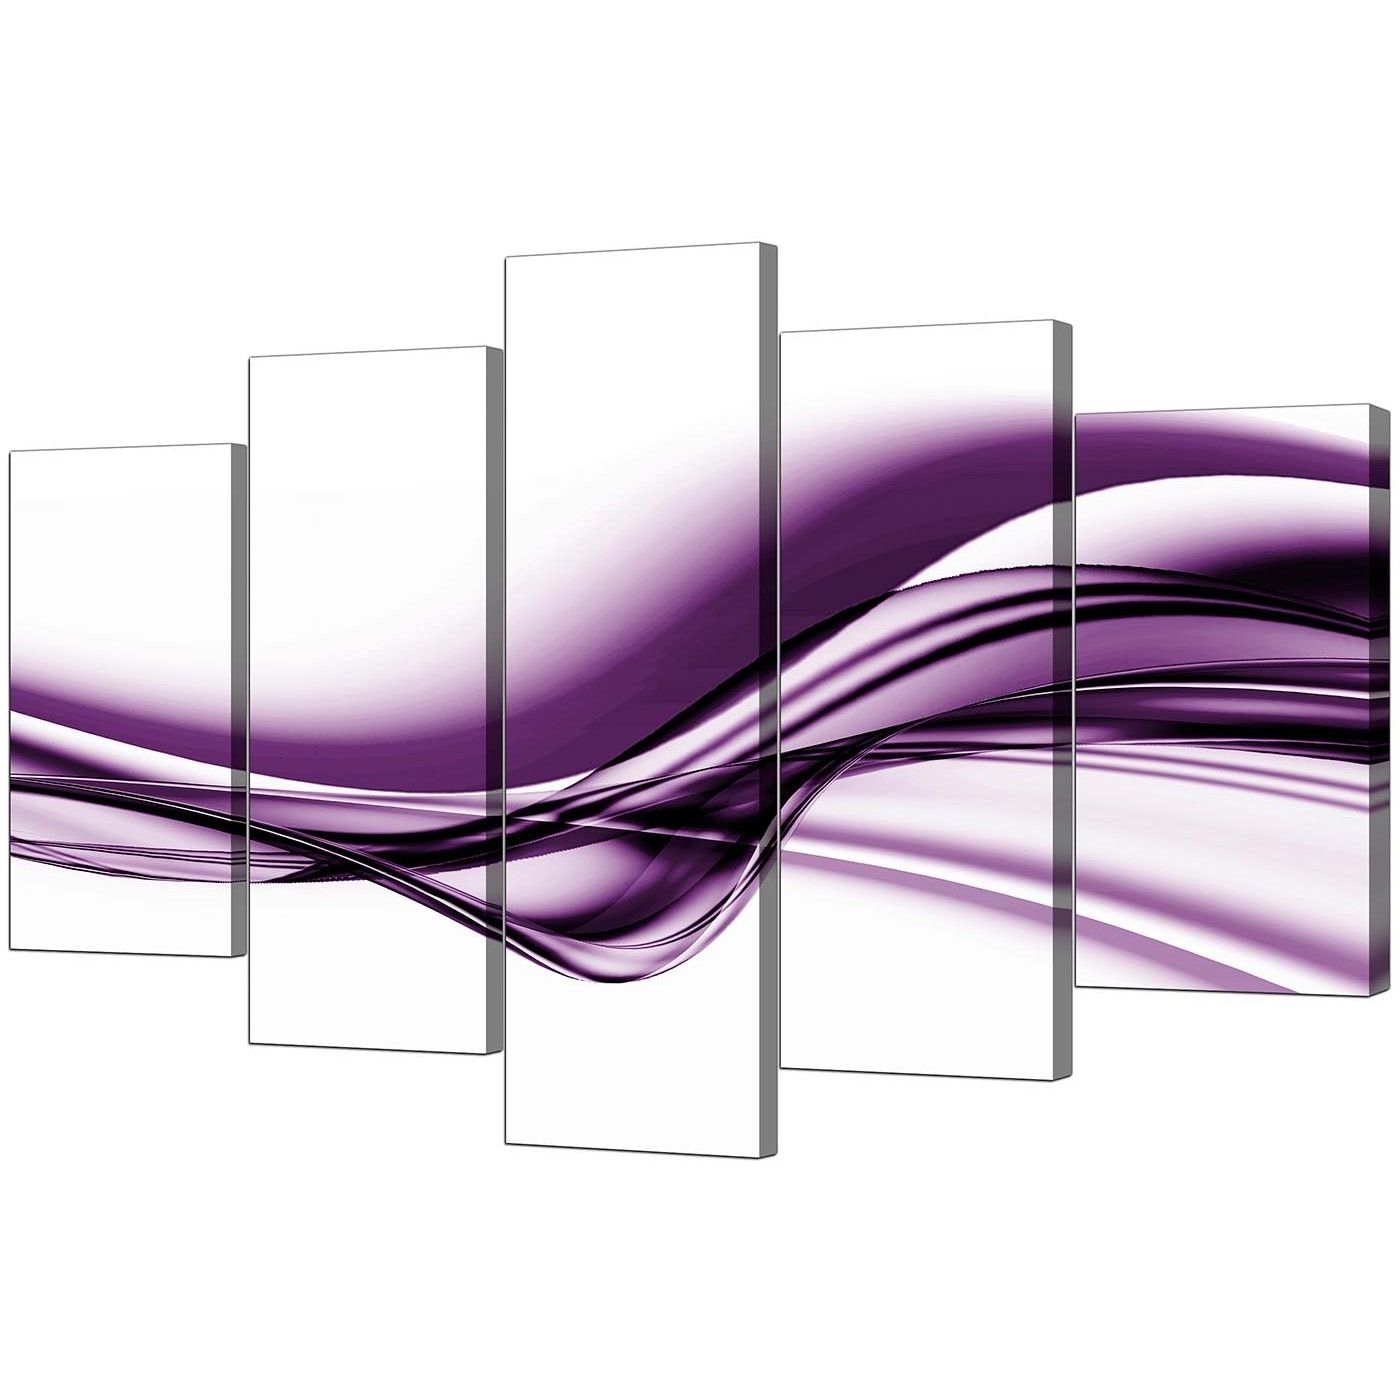 Widely Used Purple Abstract Wall Art With Regard To Extra Large Purple Abstract Canvas Prints – 5 Piece (View 1 of 15)